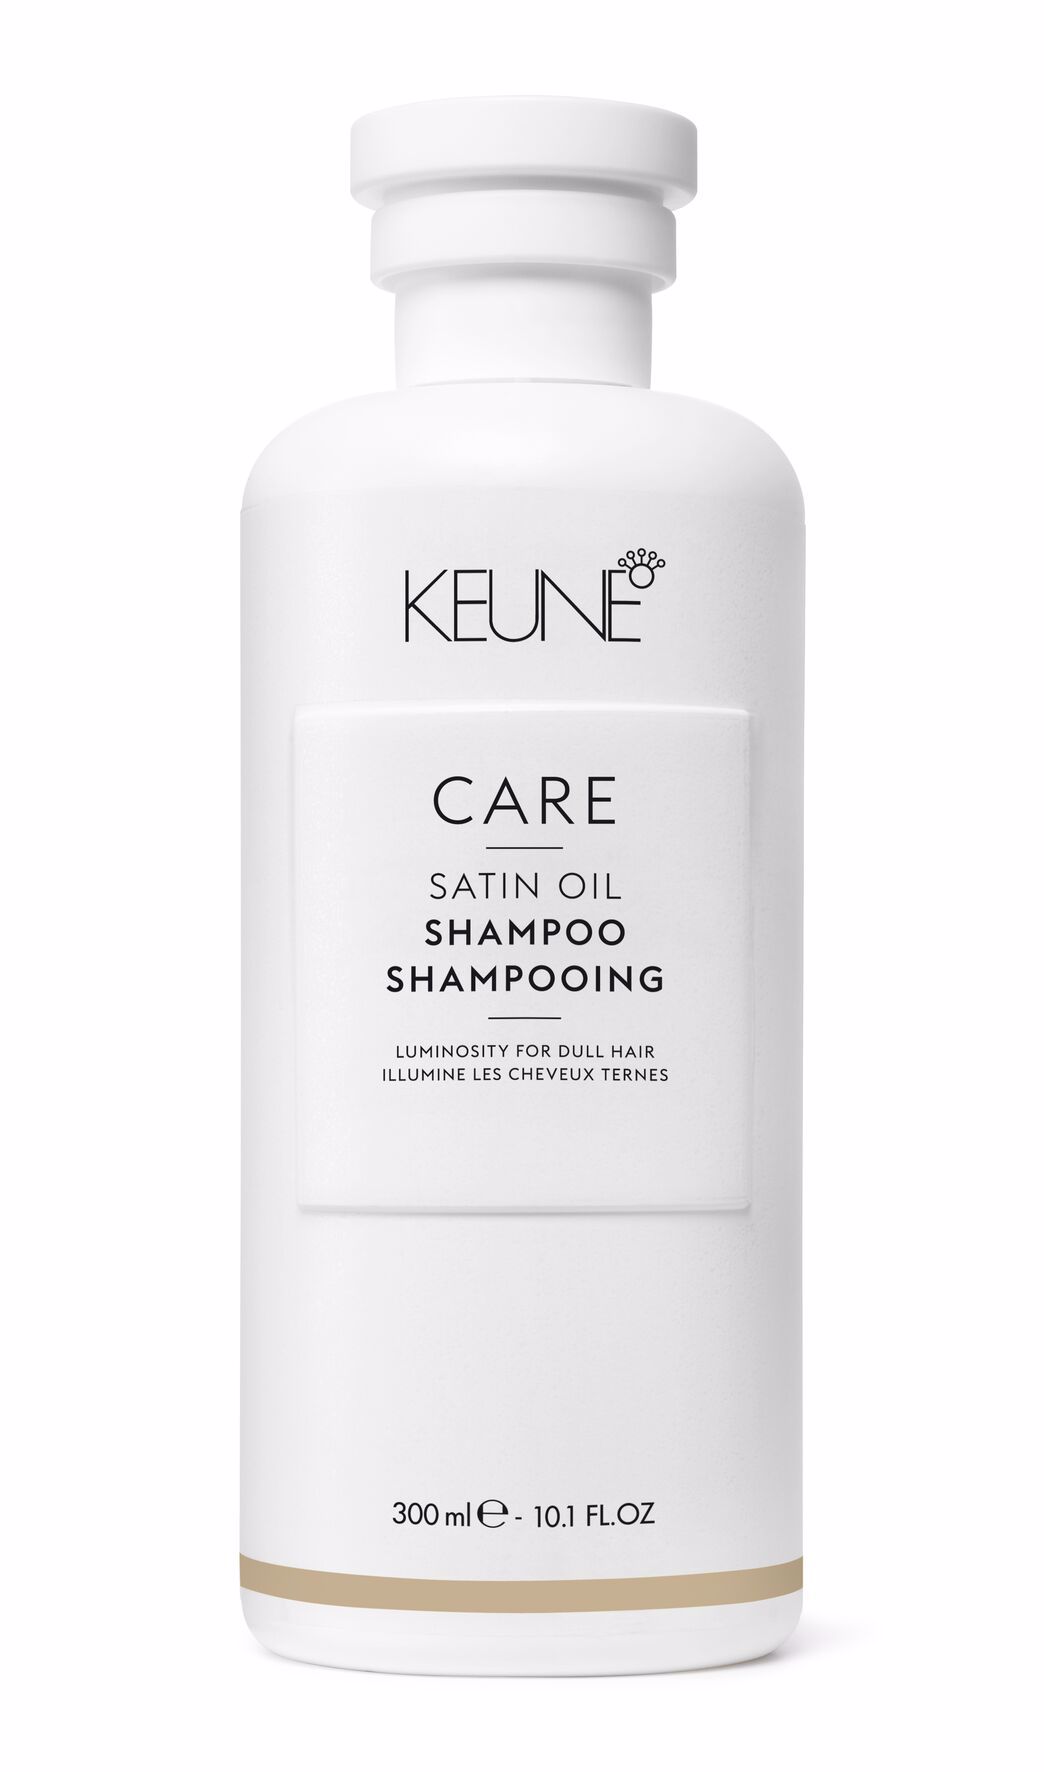 Satin Oil Shampoo is ideal for dull, dry hair. With its innovative, lightweight formula, it leaves your hair fresh, healthy, and shiny. Available on online hair shop keune.ch.